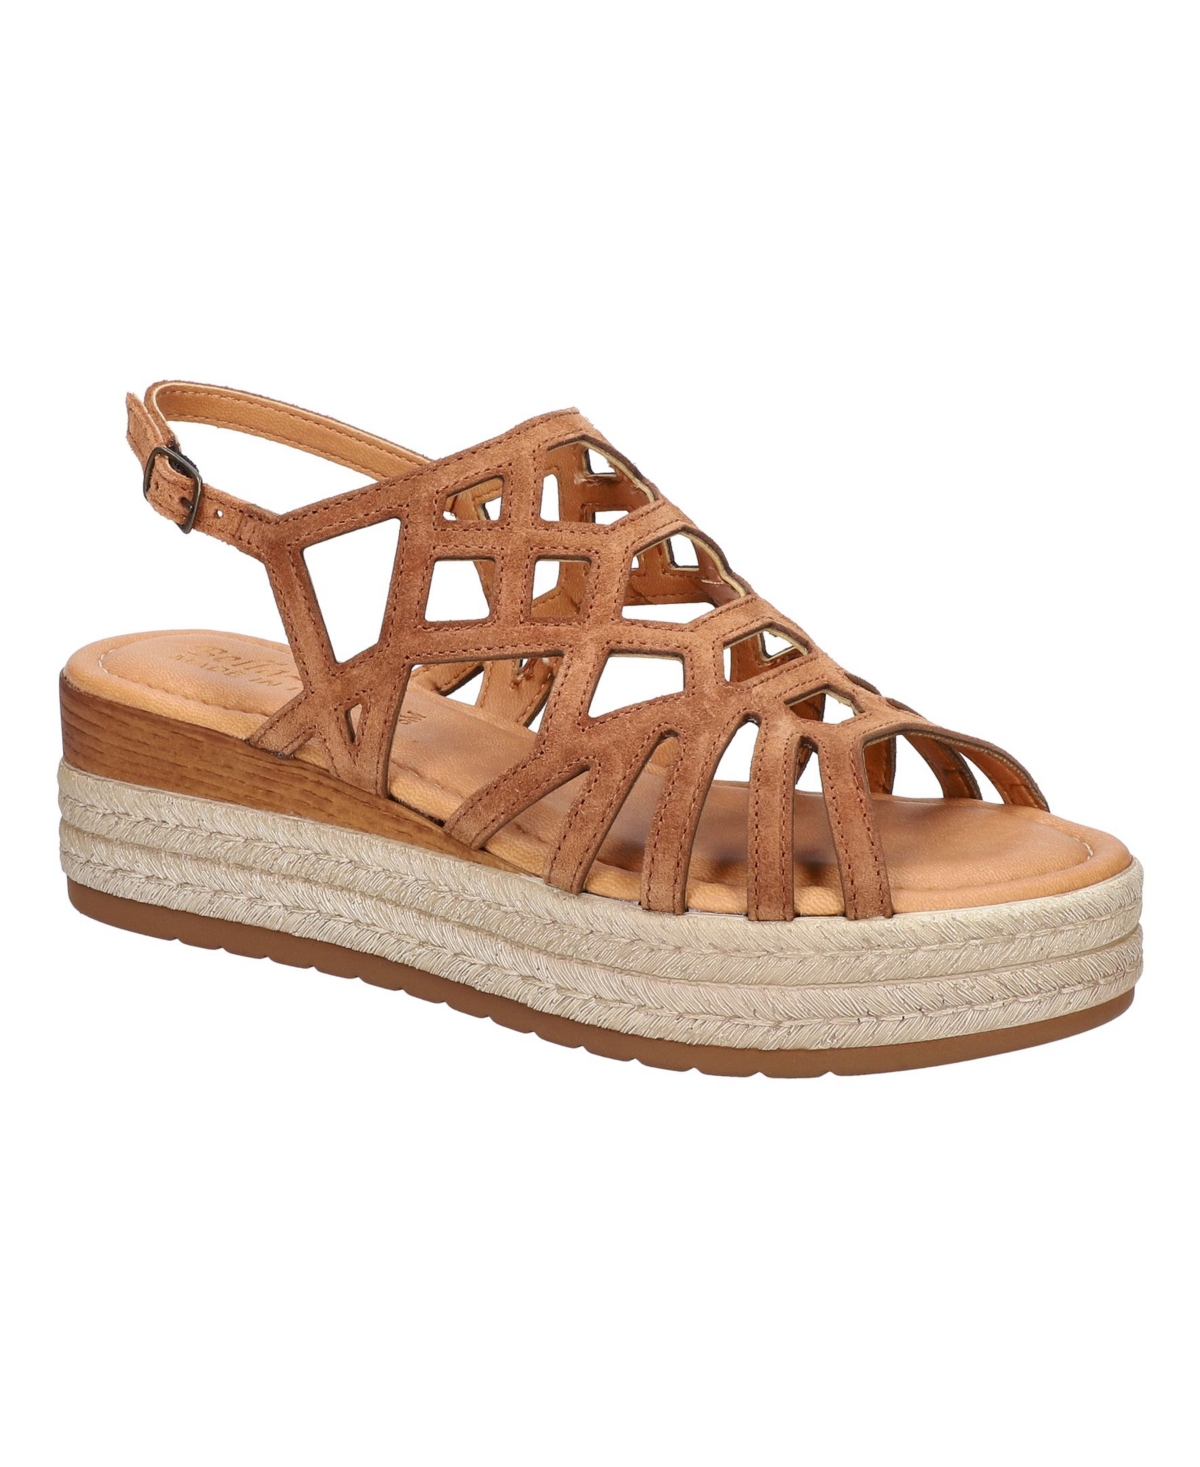 Women's Zip-Italy Wedge Sandals - Stone Suede Leather